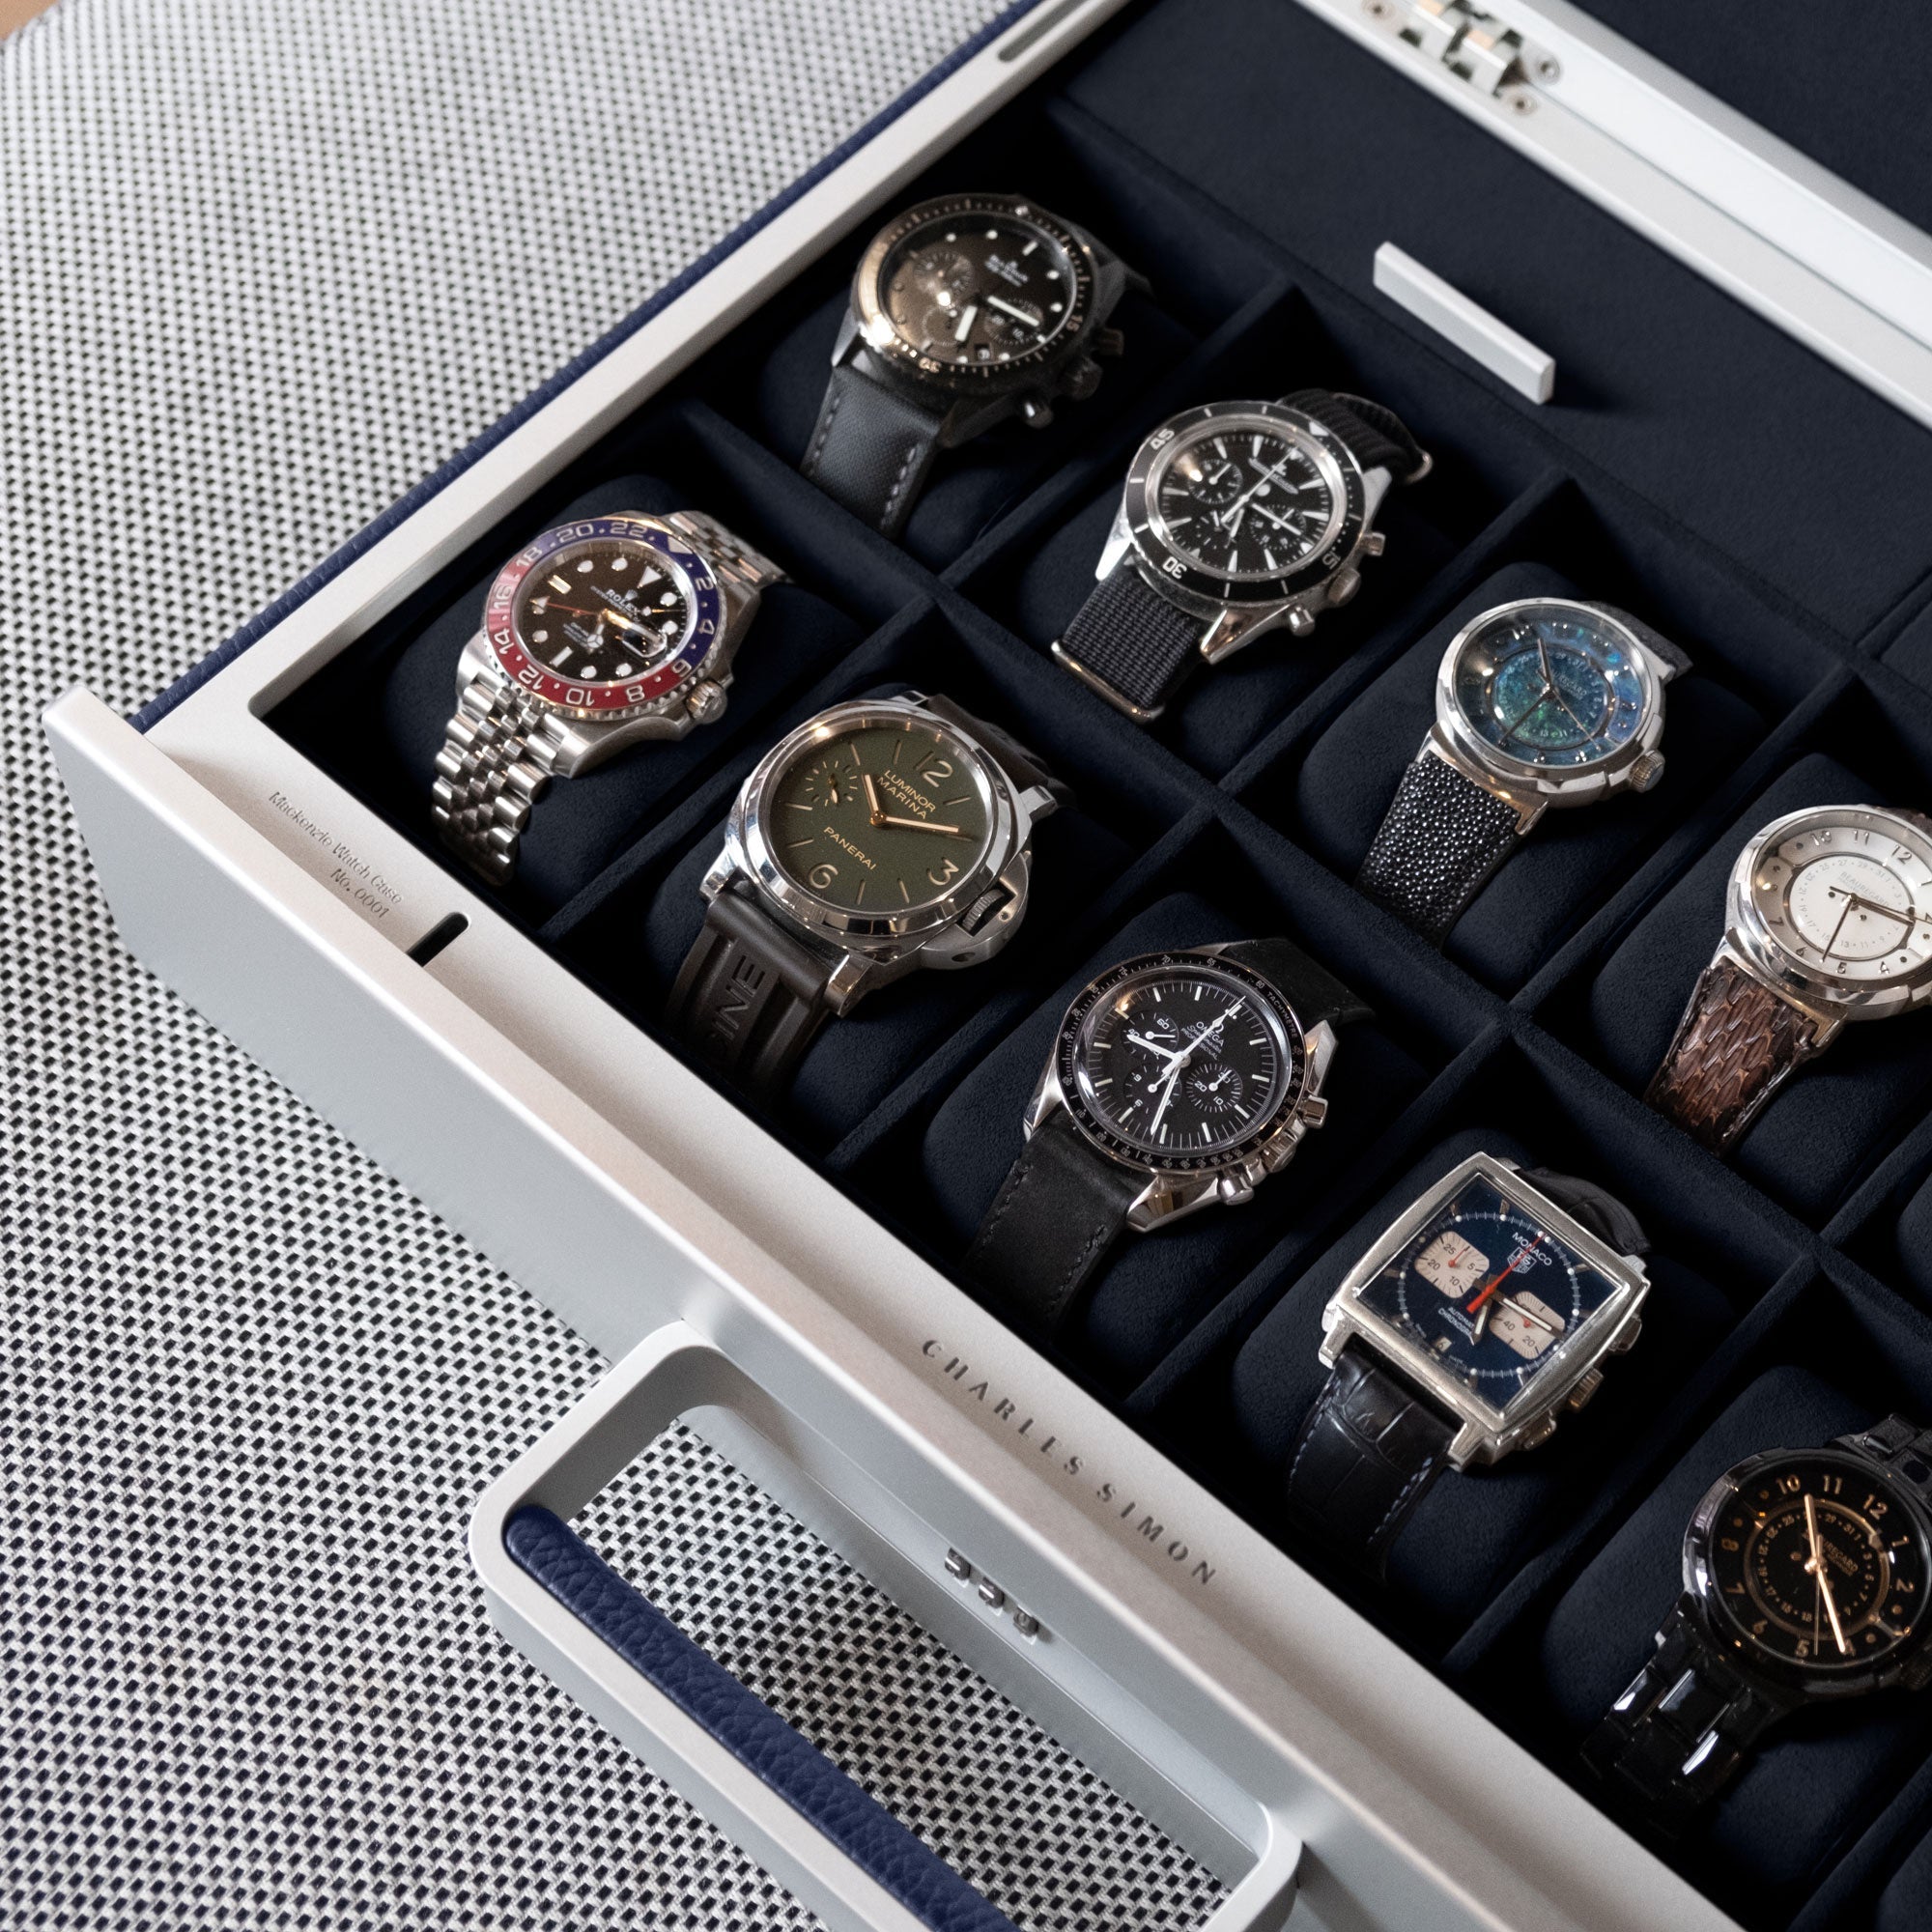 Lifestyle shot of sapphire Mackenzie watch briefcase filled with luxury watches including Rolex, Panerai and Omega